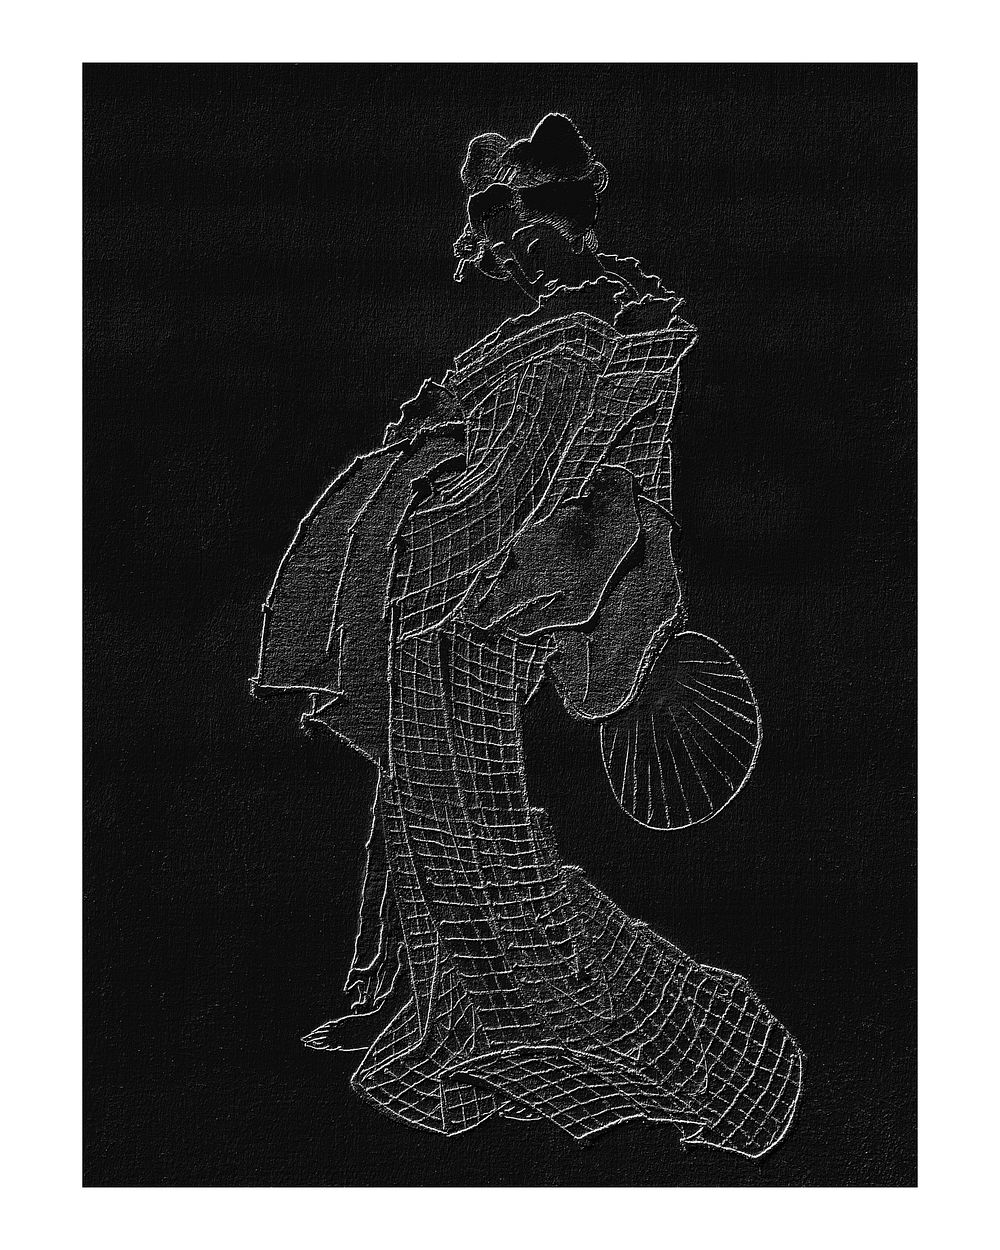 Embossed Japanese woman in kimono and a shamisen on the floor ukyio-e style vintage illustration wall art print and poster…